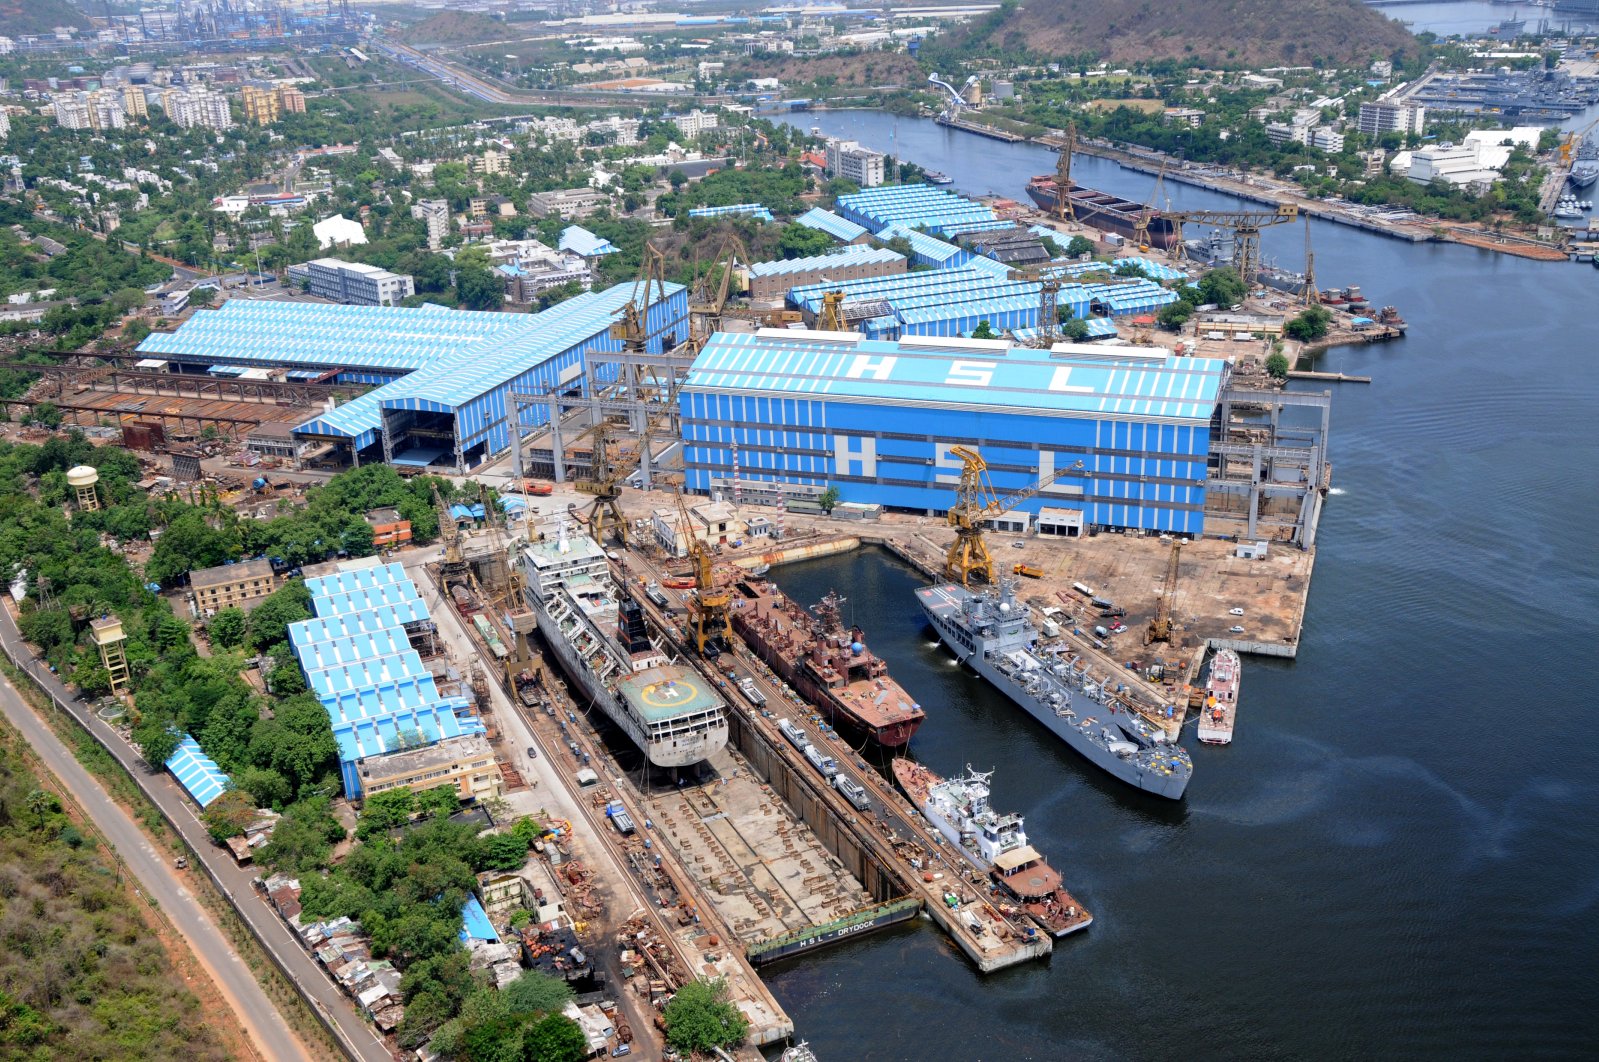 An aerial view of the Hindustan Shipyard Limited. (Wikipedia Image)